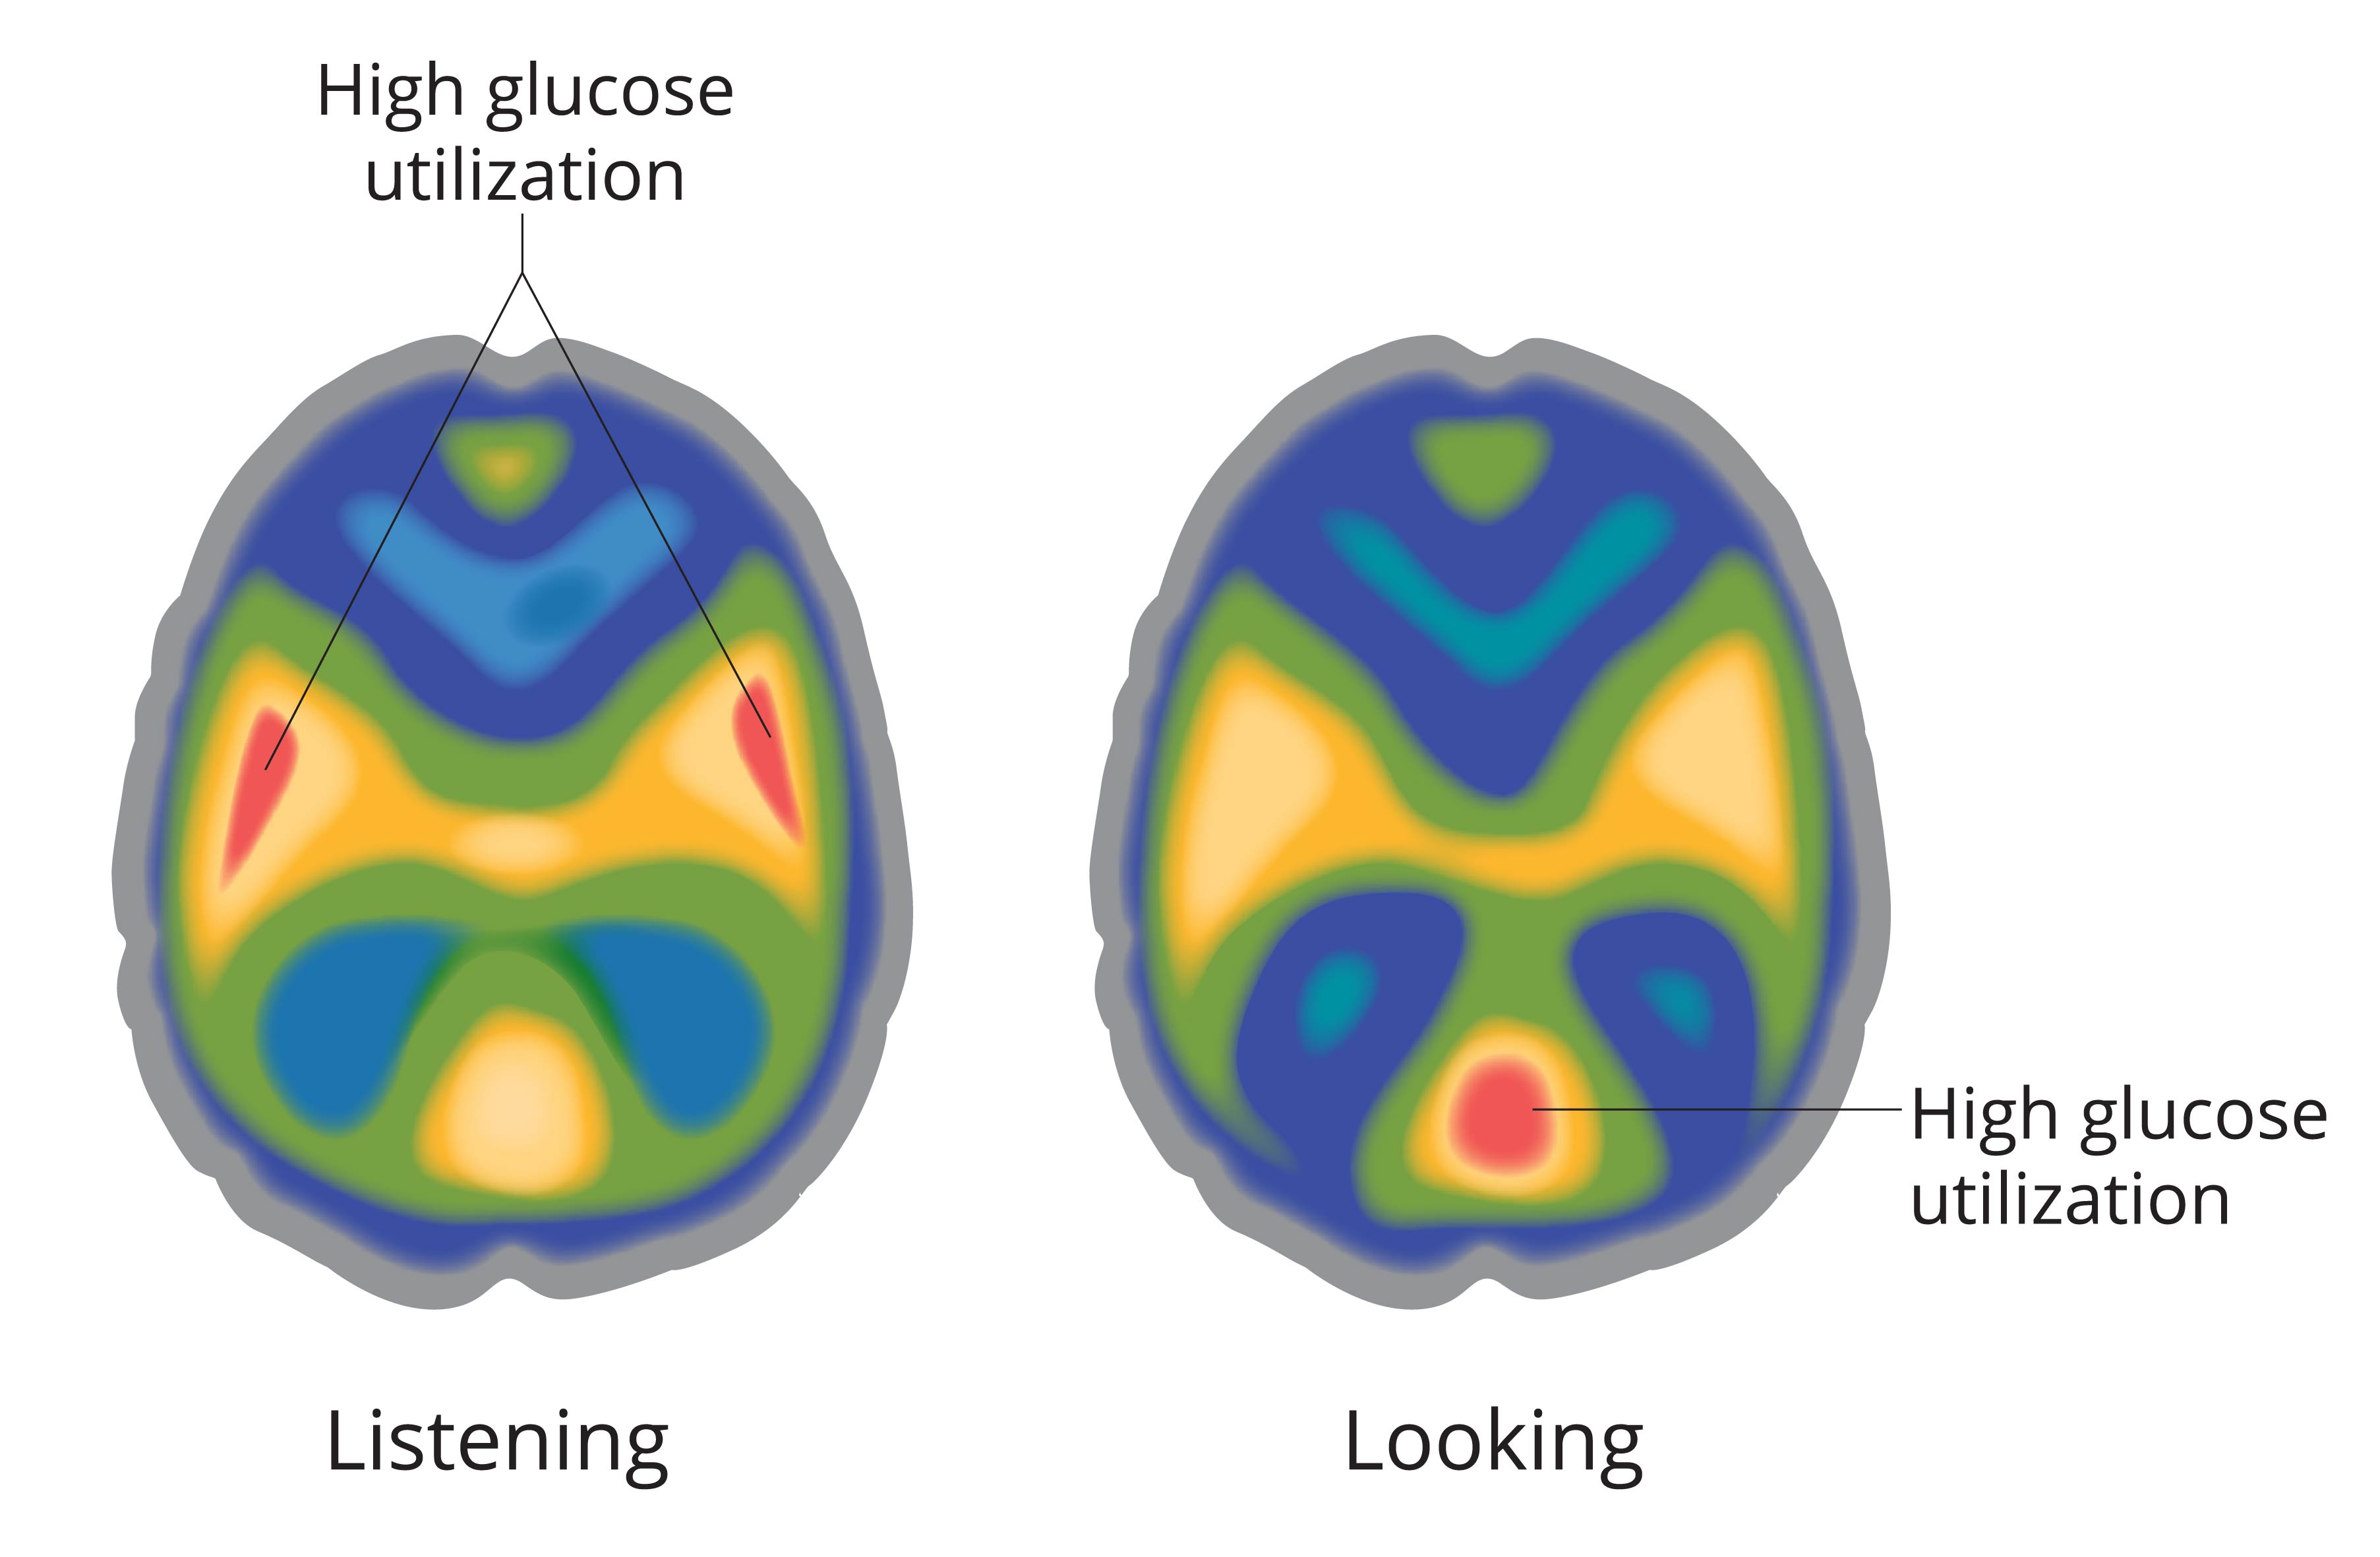 There are images of two PET scans of the brain. The first scan has high glucose utilization on the sides of the brain in the temporal lobes.  This is noticeable by the red areas on the scan and demonstrates that someone is listening.  The second scan has high glucose utilization at the back of the brain in the occipital lobe.  This is noticeable by the red area on the scan and demonstrates that someone is looking.  The areas with low glucose utilization in the brain are green and blue.